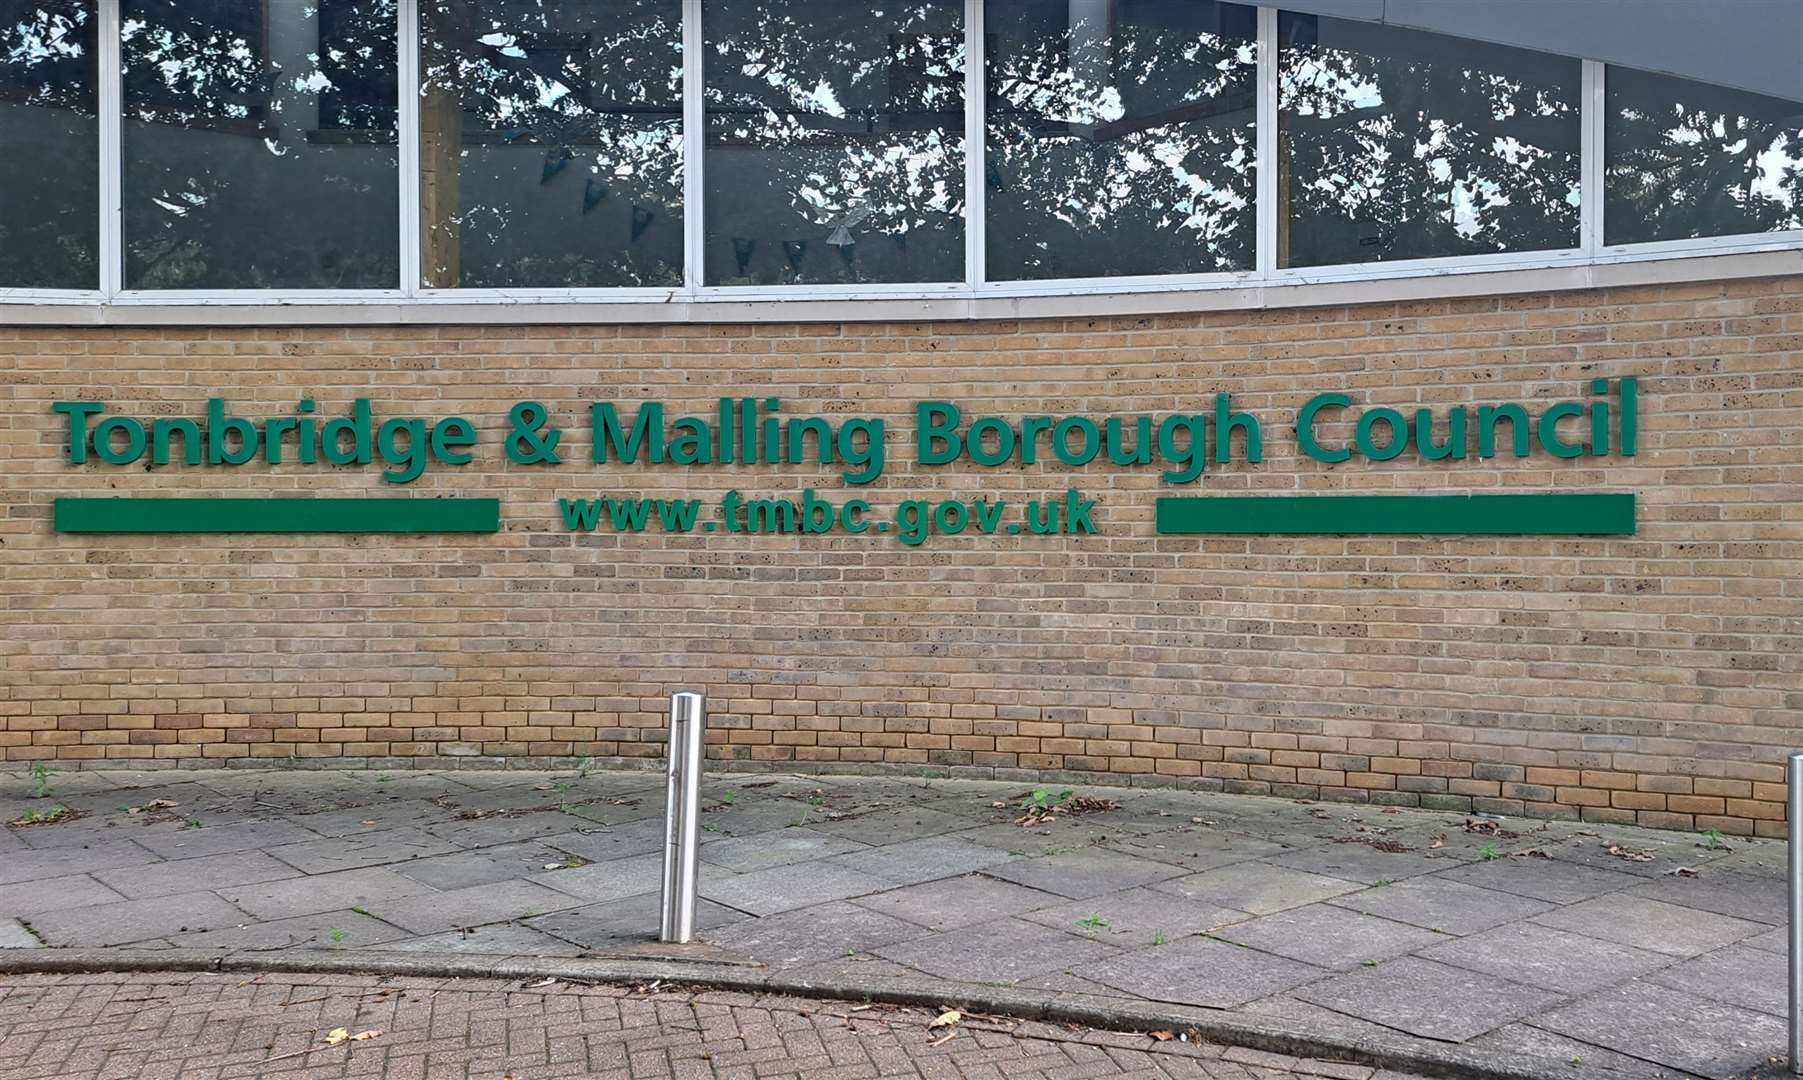 Tonbridge and Malling Borough Council is looking to scrap the discount to save money